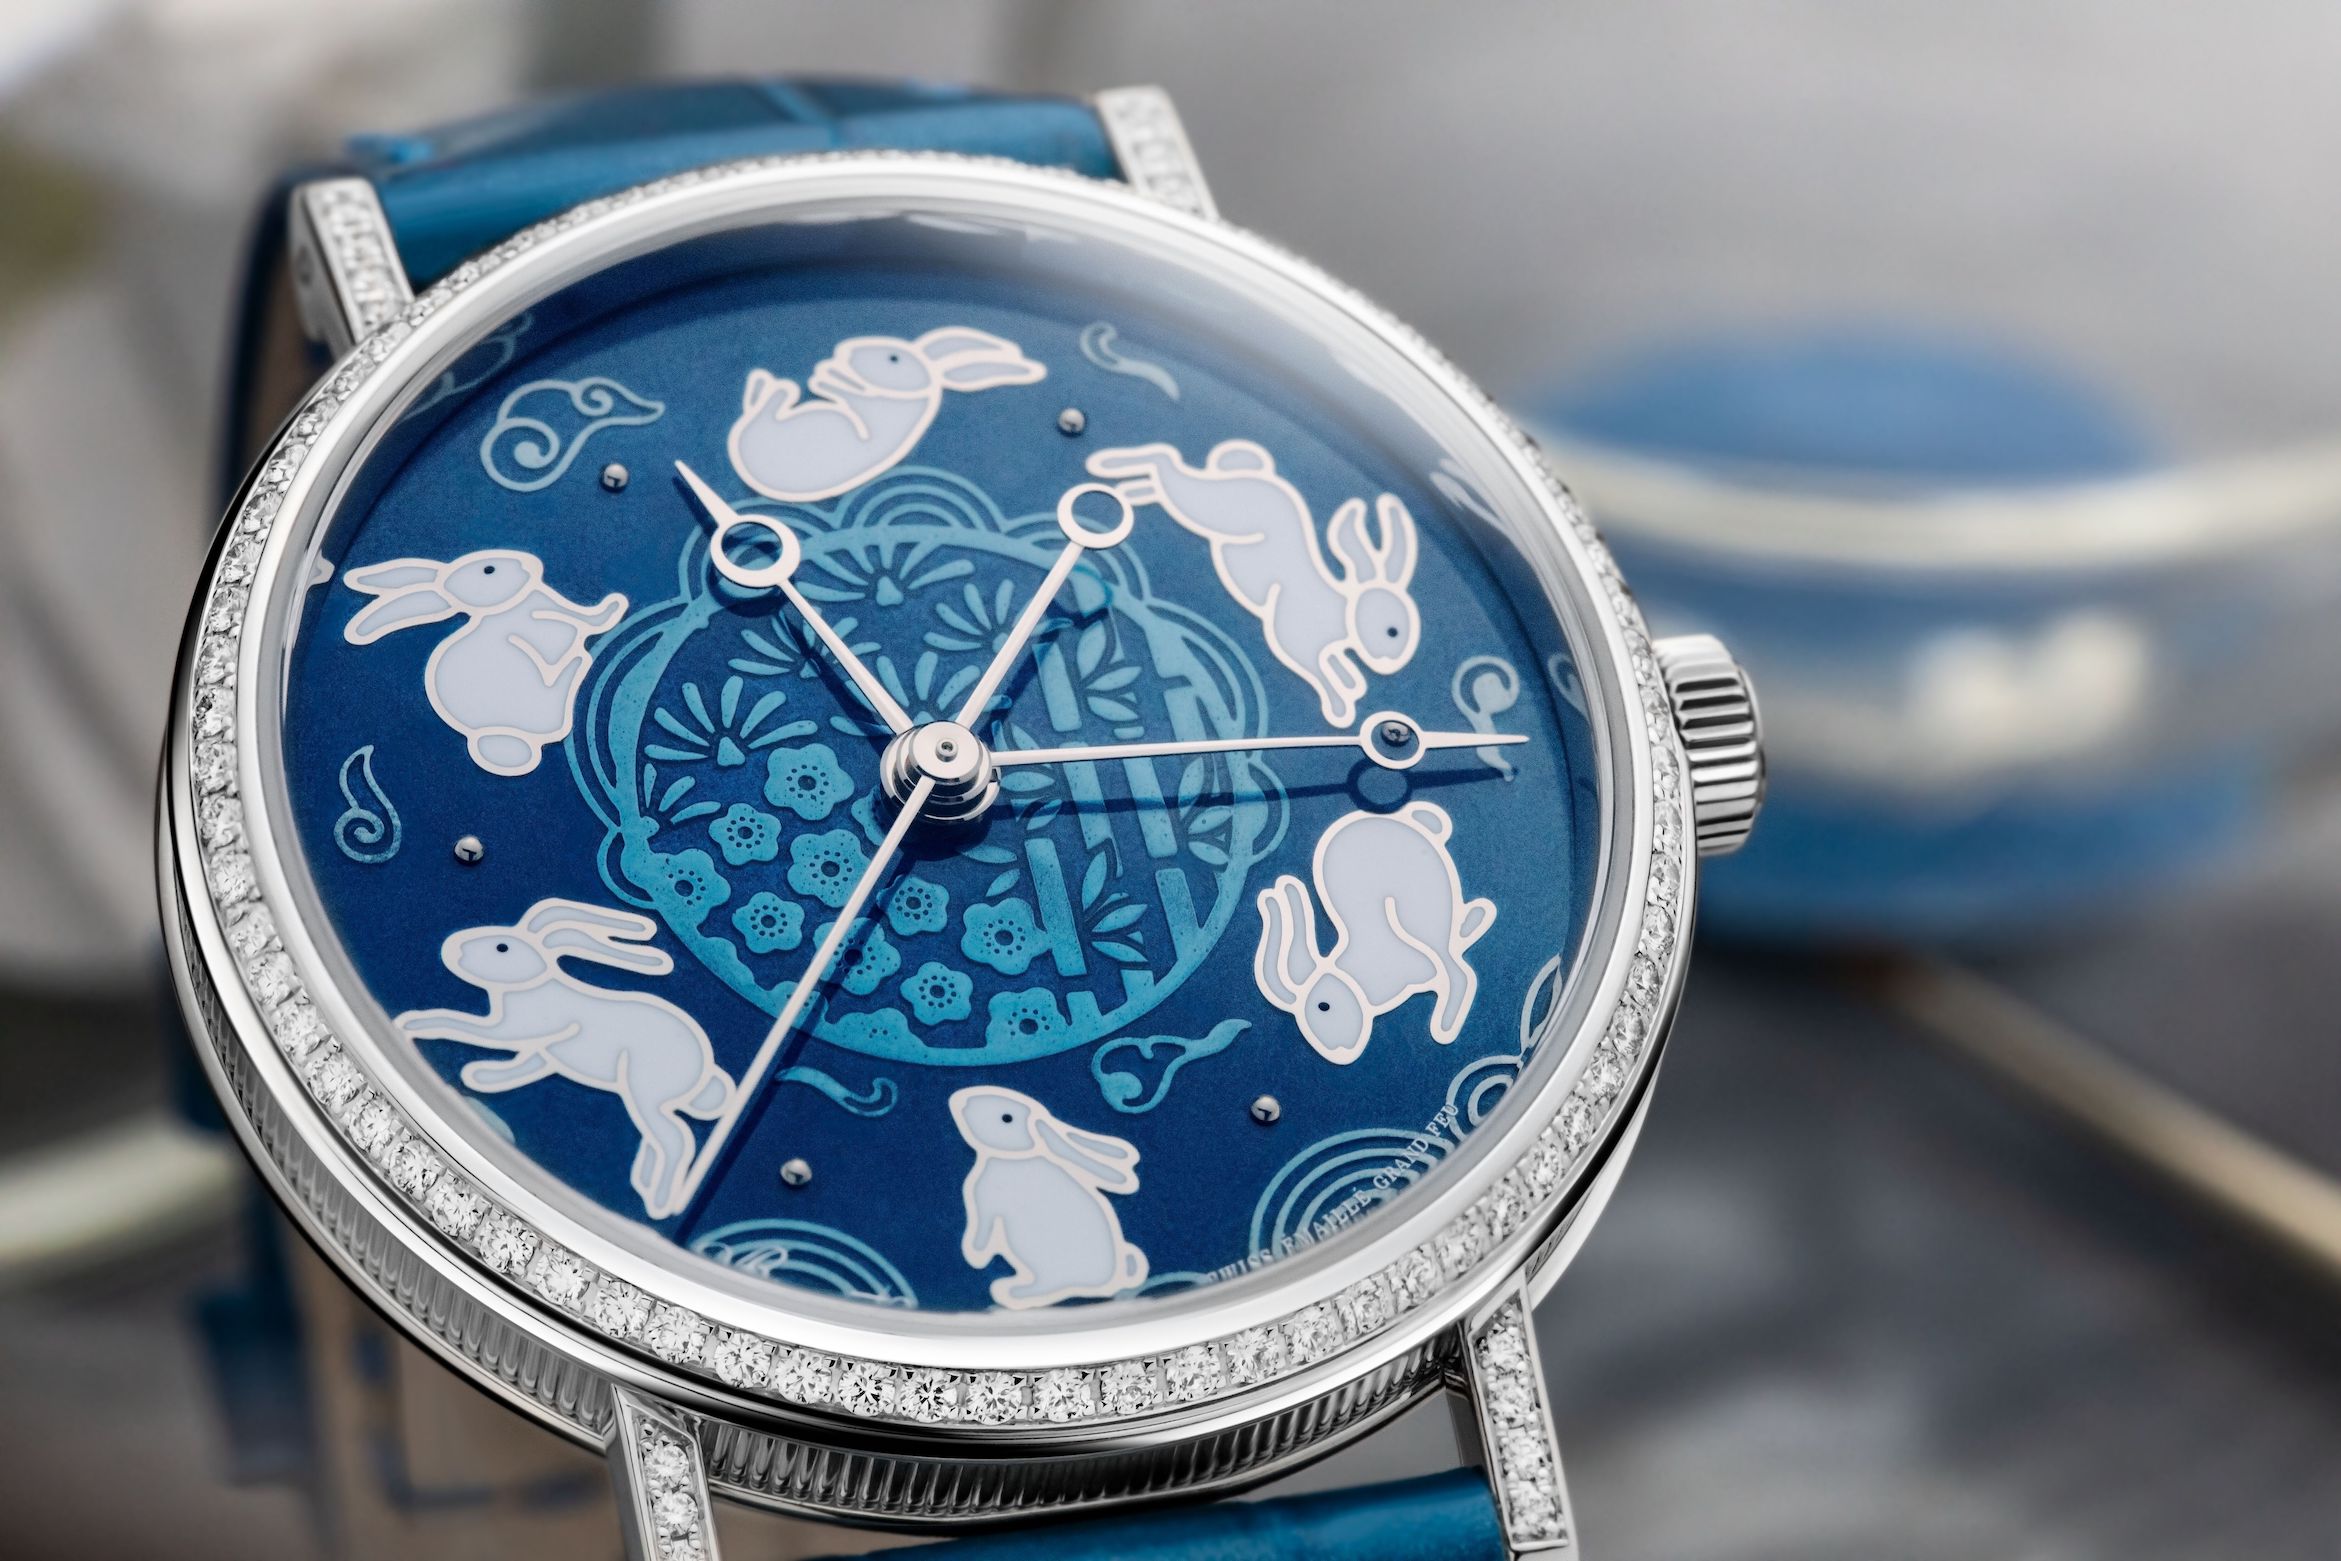 Breguet Classique 9075 Chinese New Year